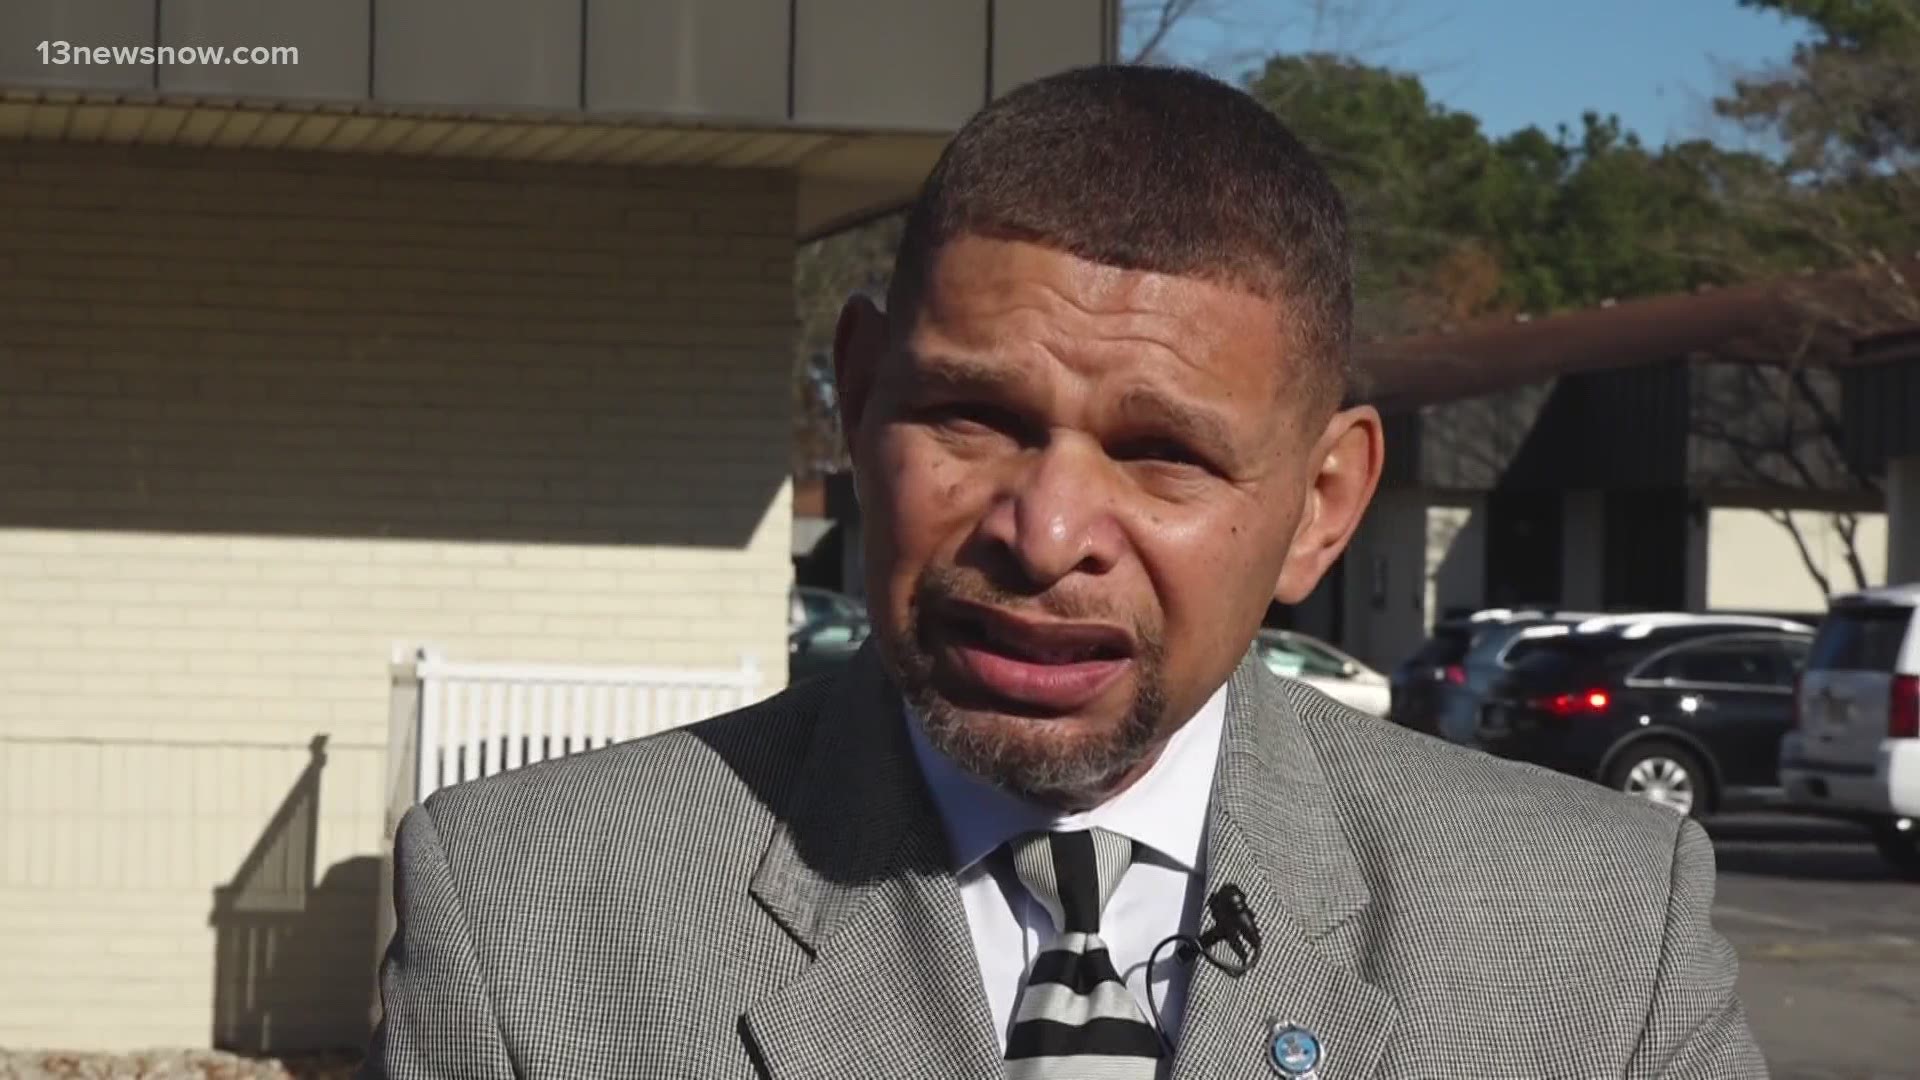 Kenny Miller, a former VBPD officer of 35 years and retired Petersburg Police Chief, says advocates are justified in calling for immediate changes, transparency.